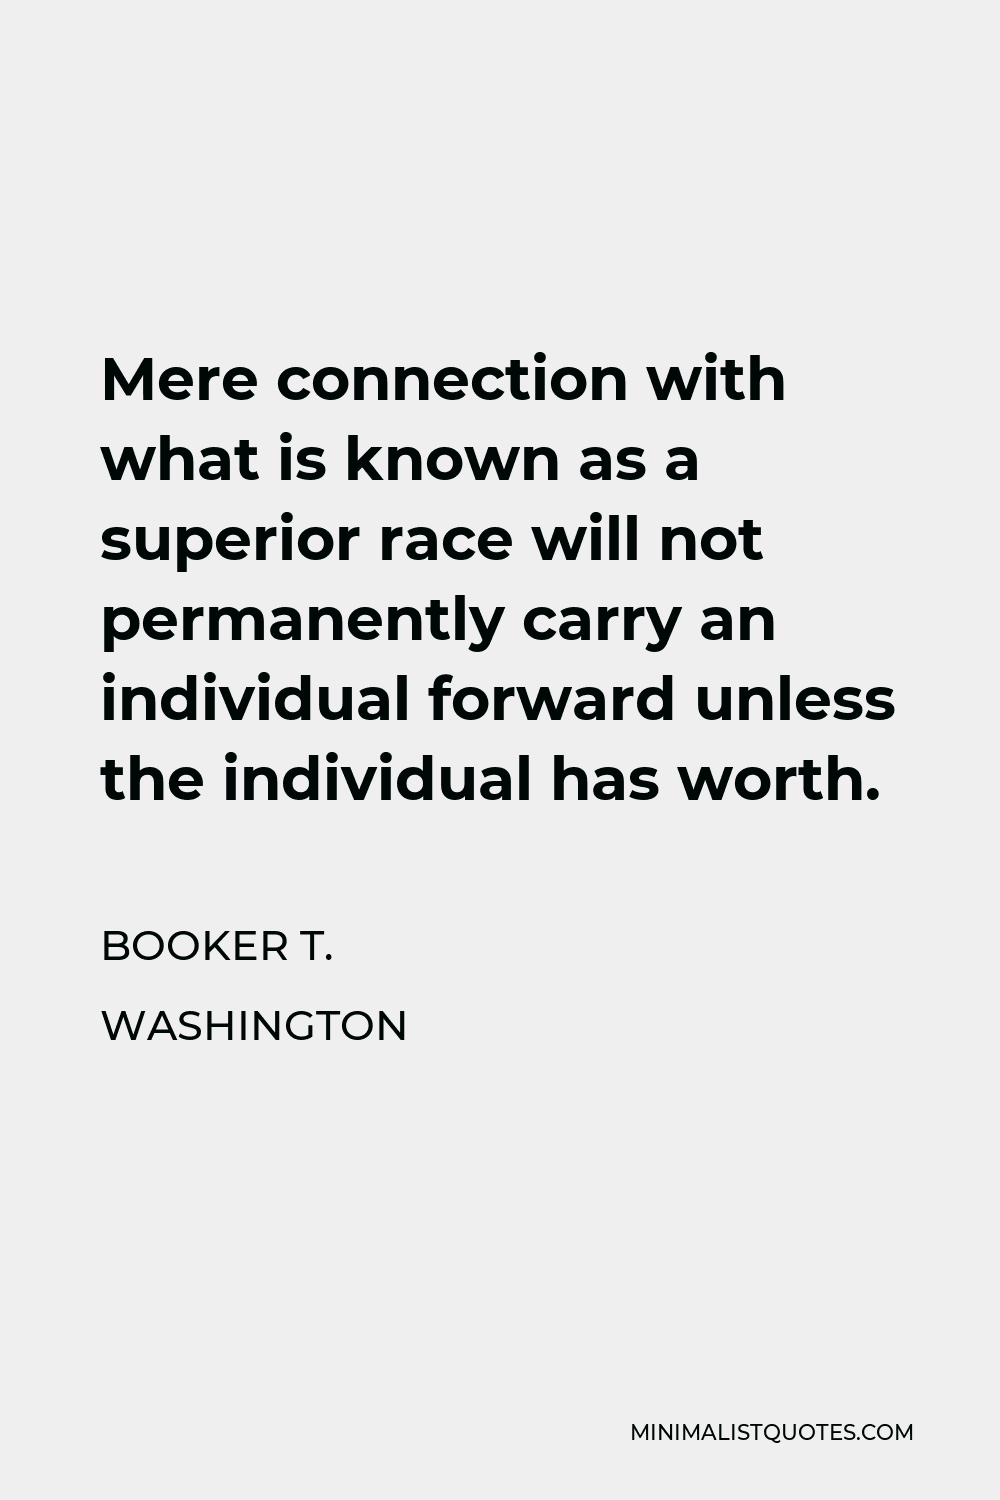 Booker T. Washington Quote - Mere connection with what is known as a superior race will not permanently carry an individual forward unless the individual has worth.